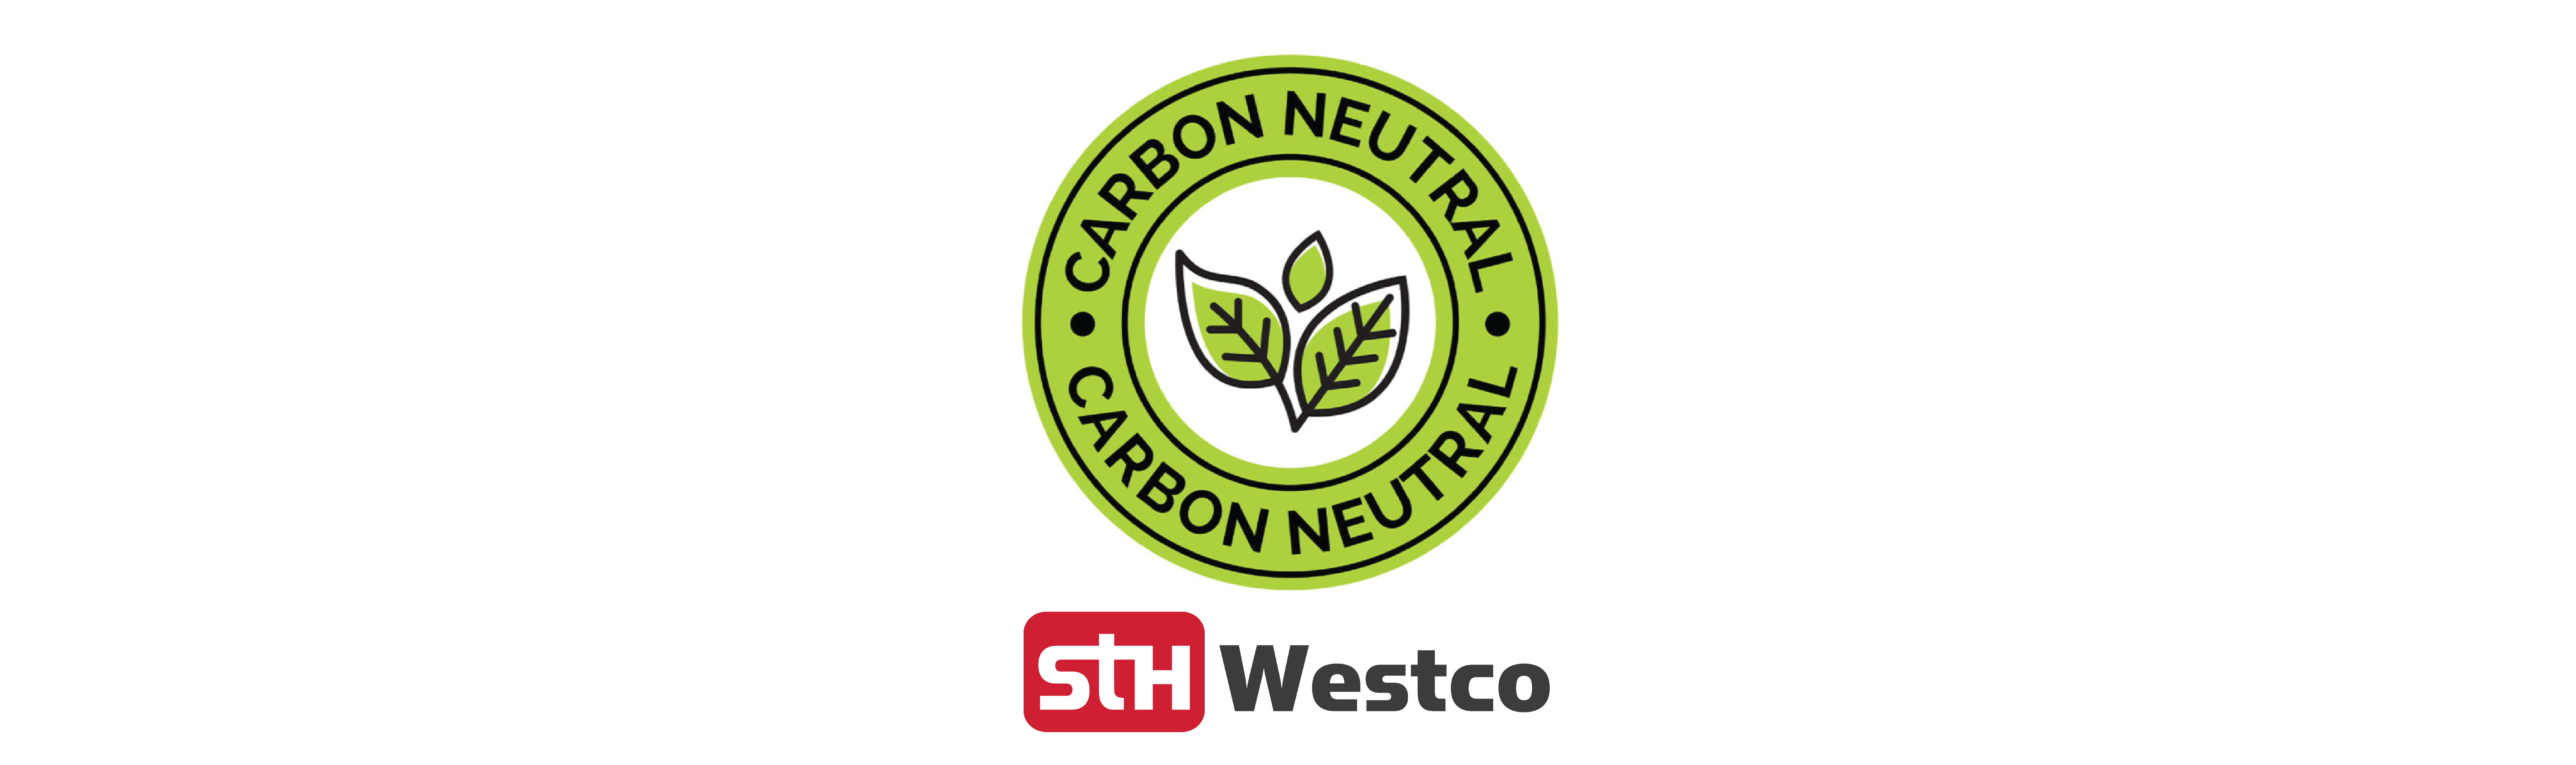 STH Westco’s commitment to becoming carbon neutral